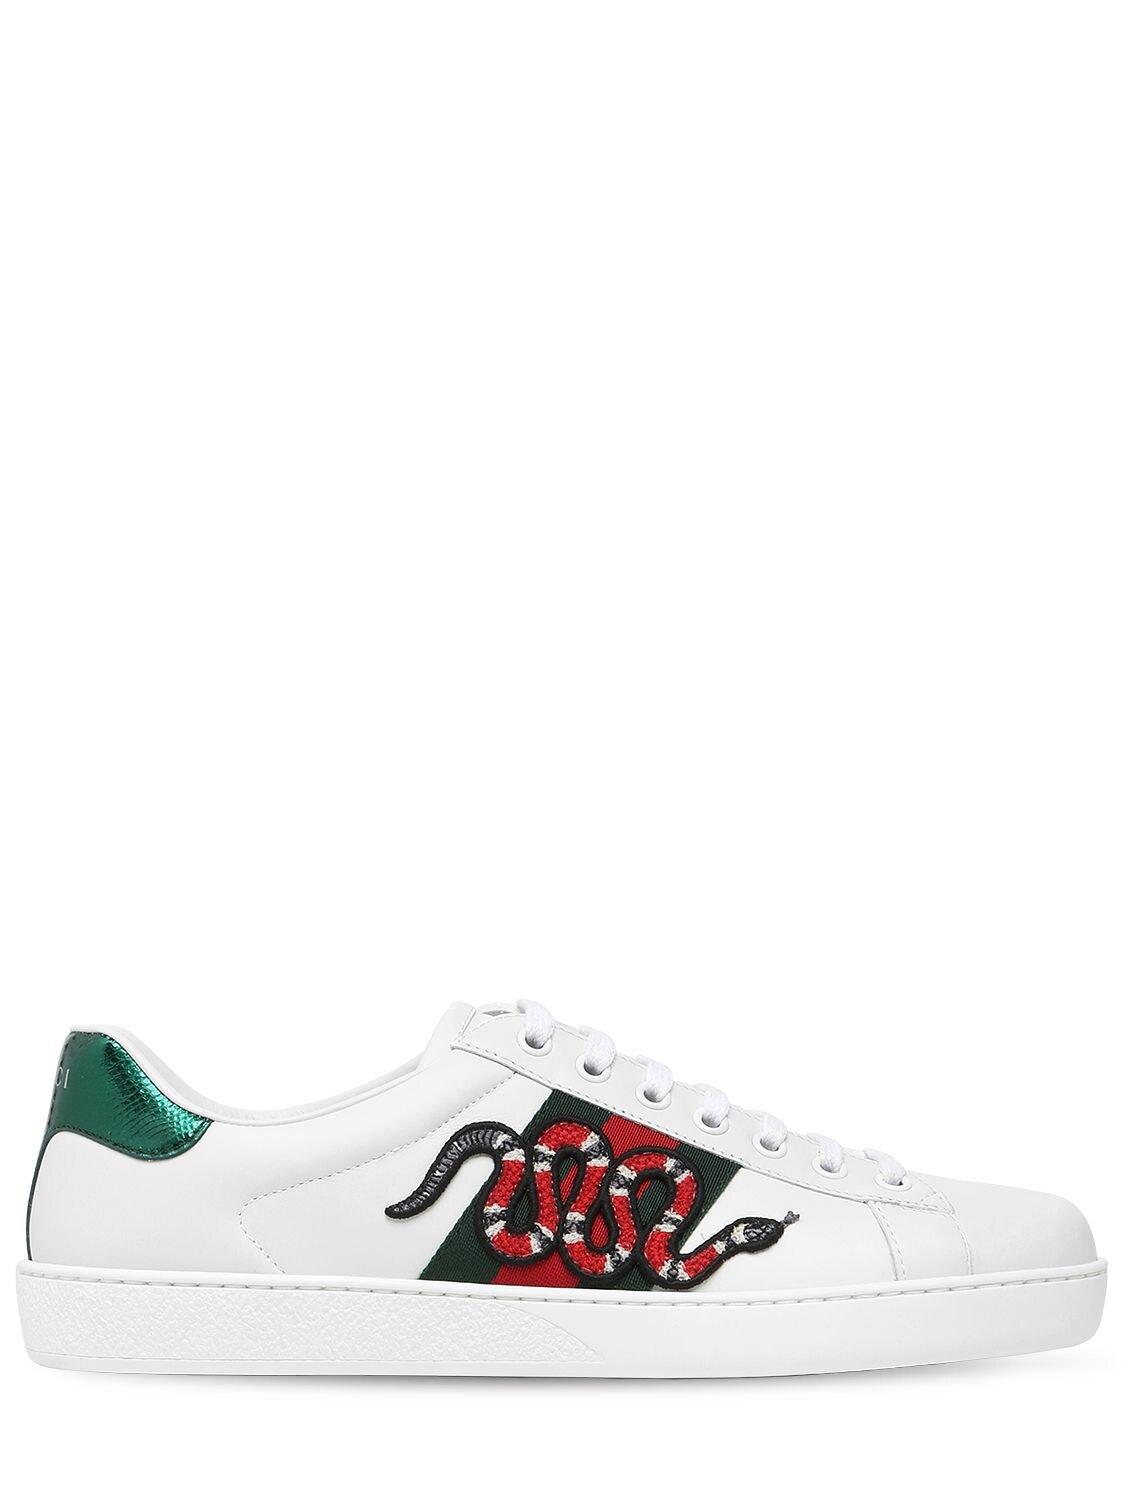 hobby lukke tilfredshed Gucci Leather Ace Embroidered Sneaker in White for Men - Save 45% - Lyst